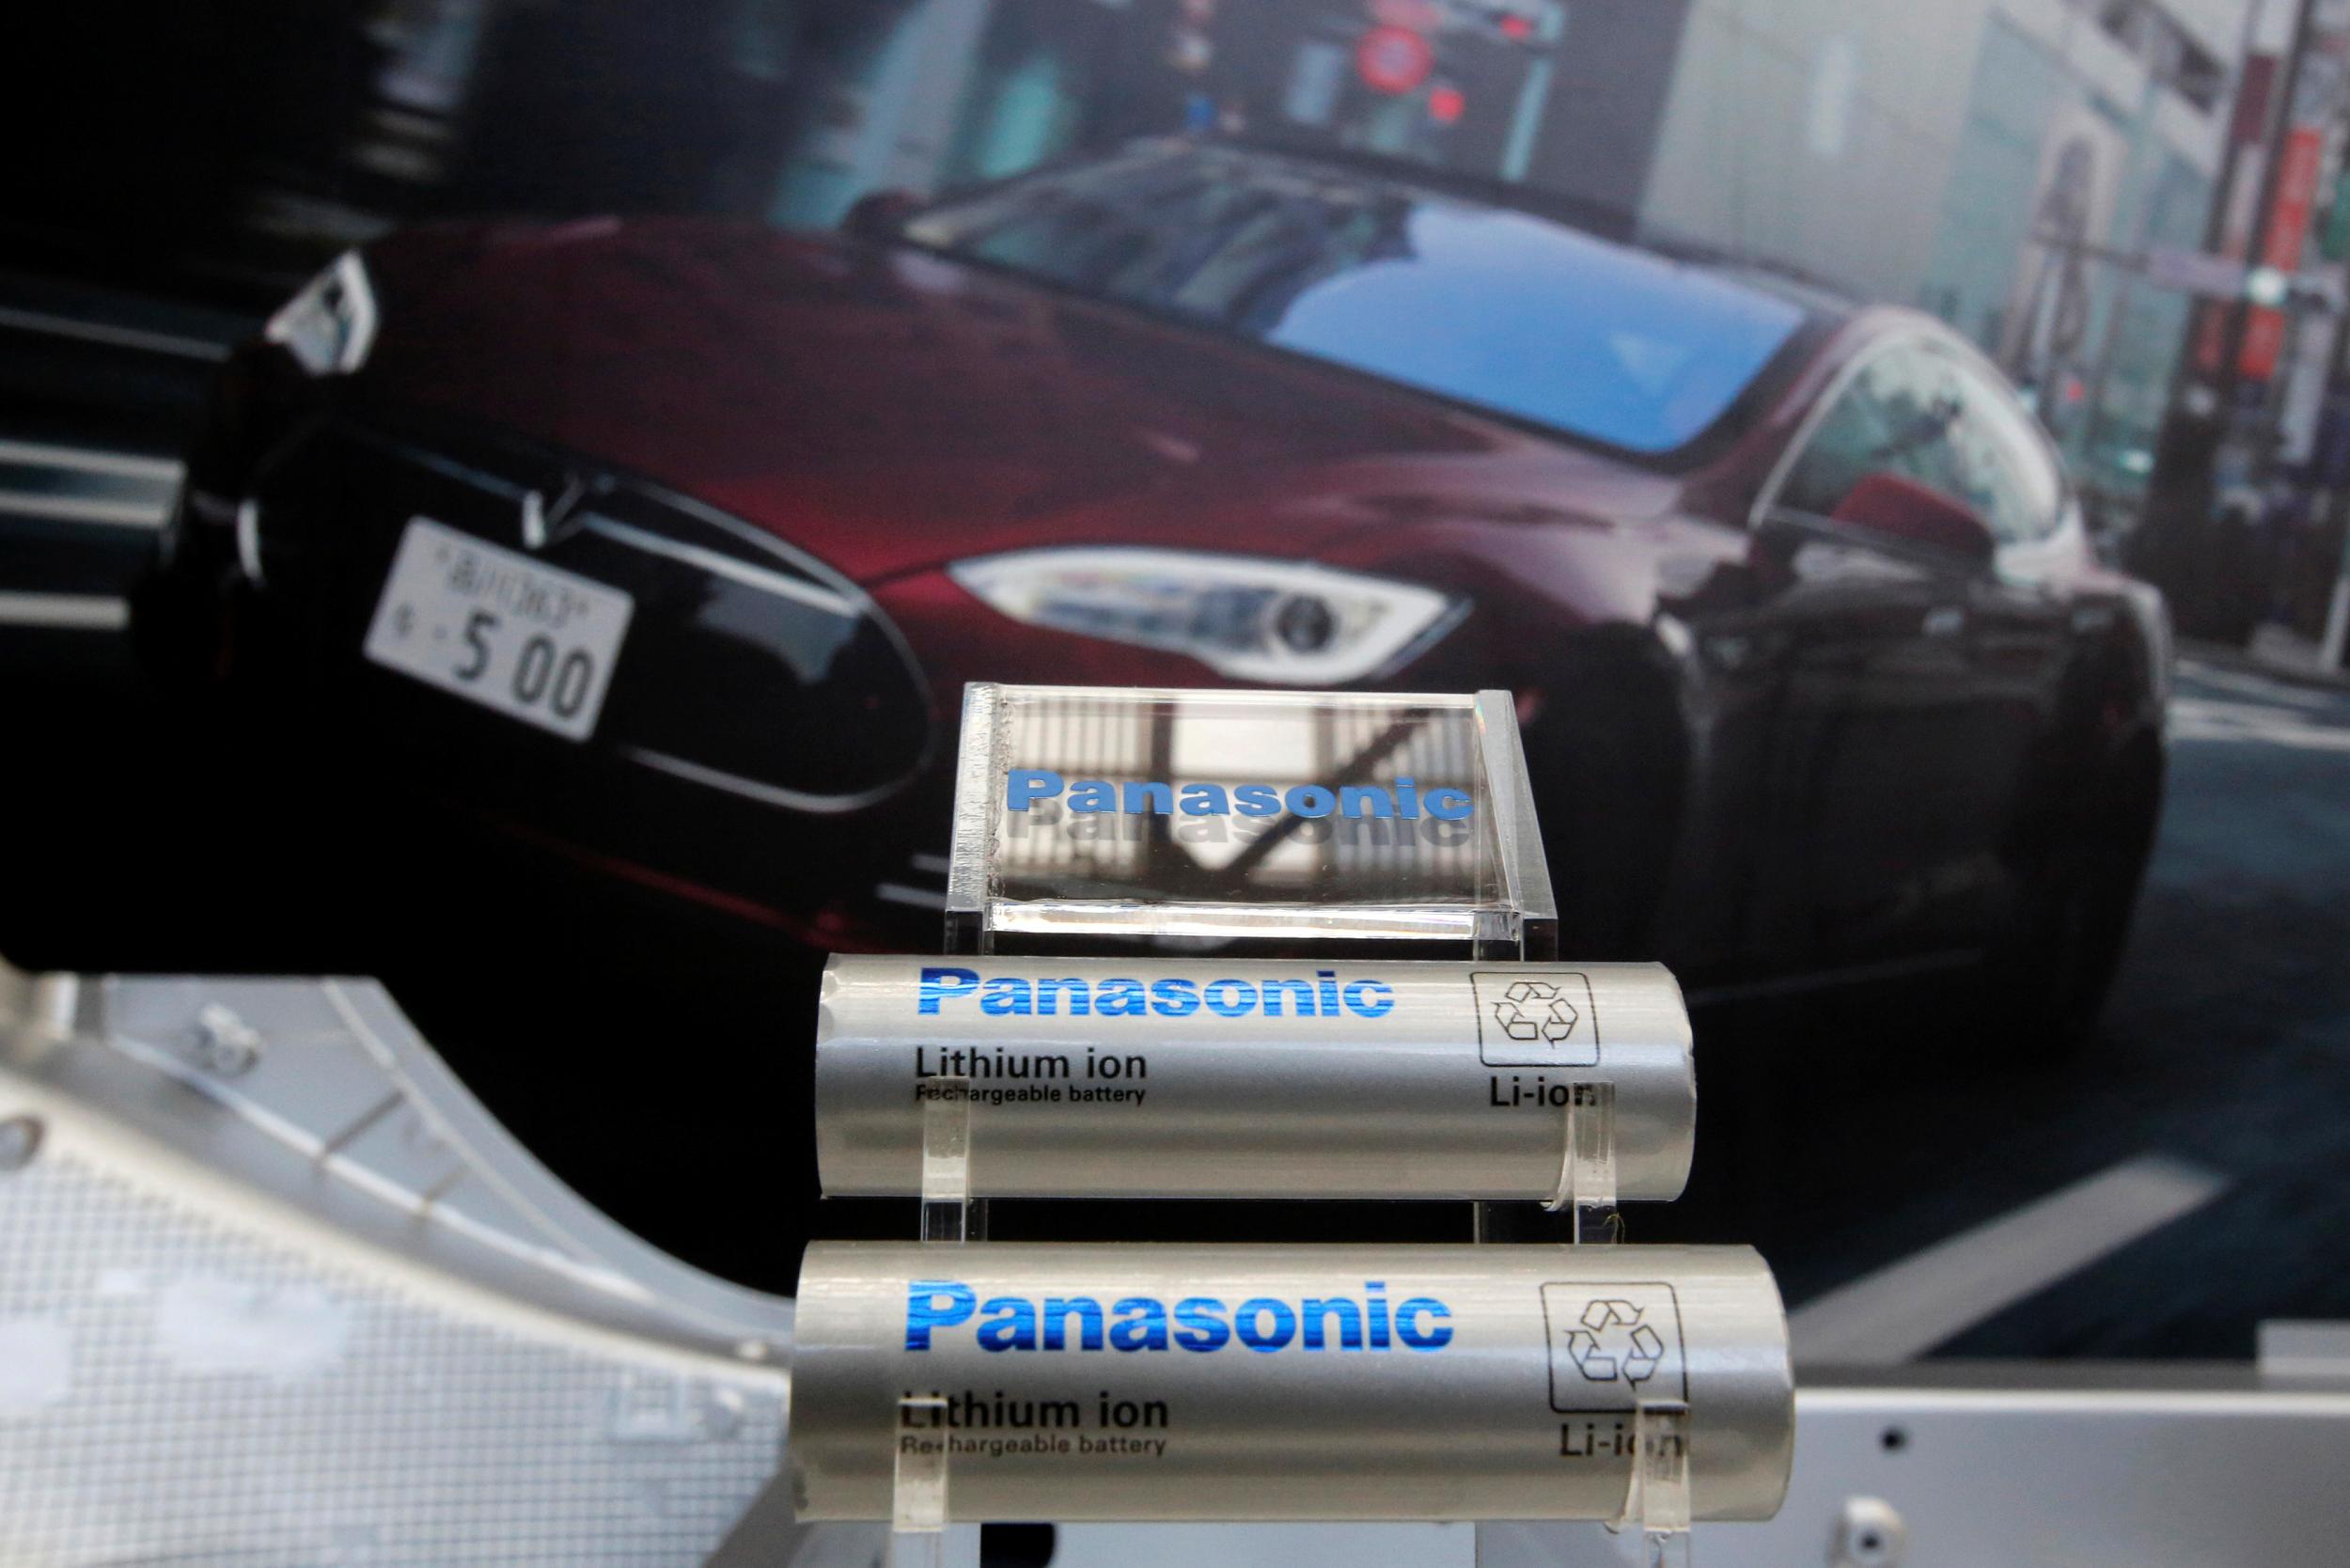 Panasonic will start car battery production at its LCD plant in western Japan in 2019